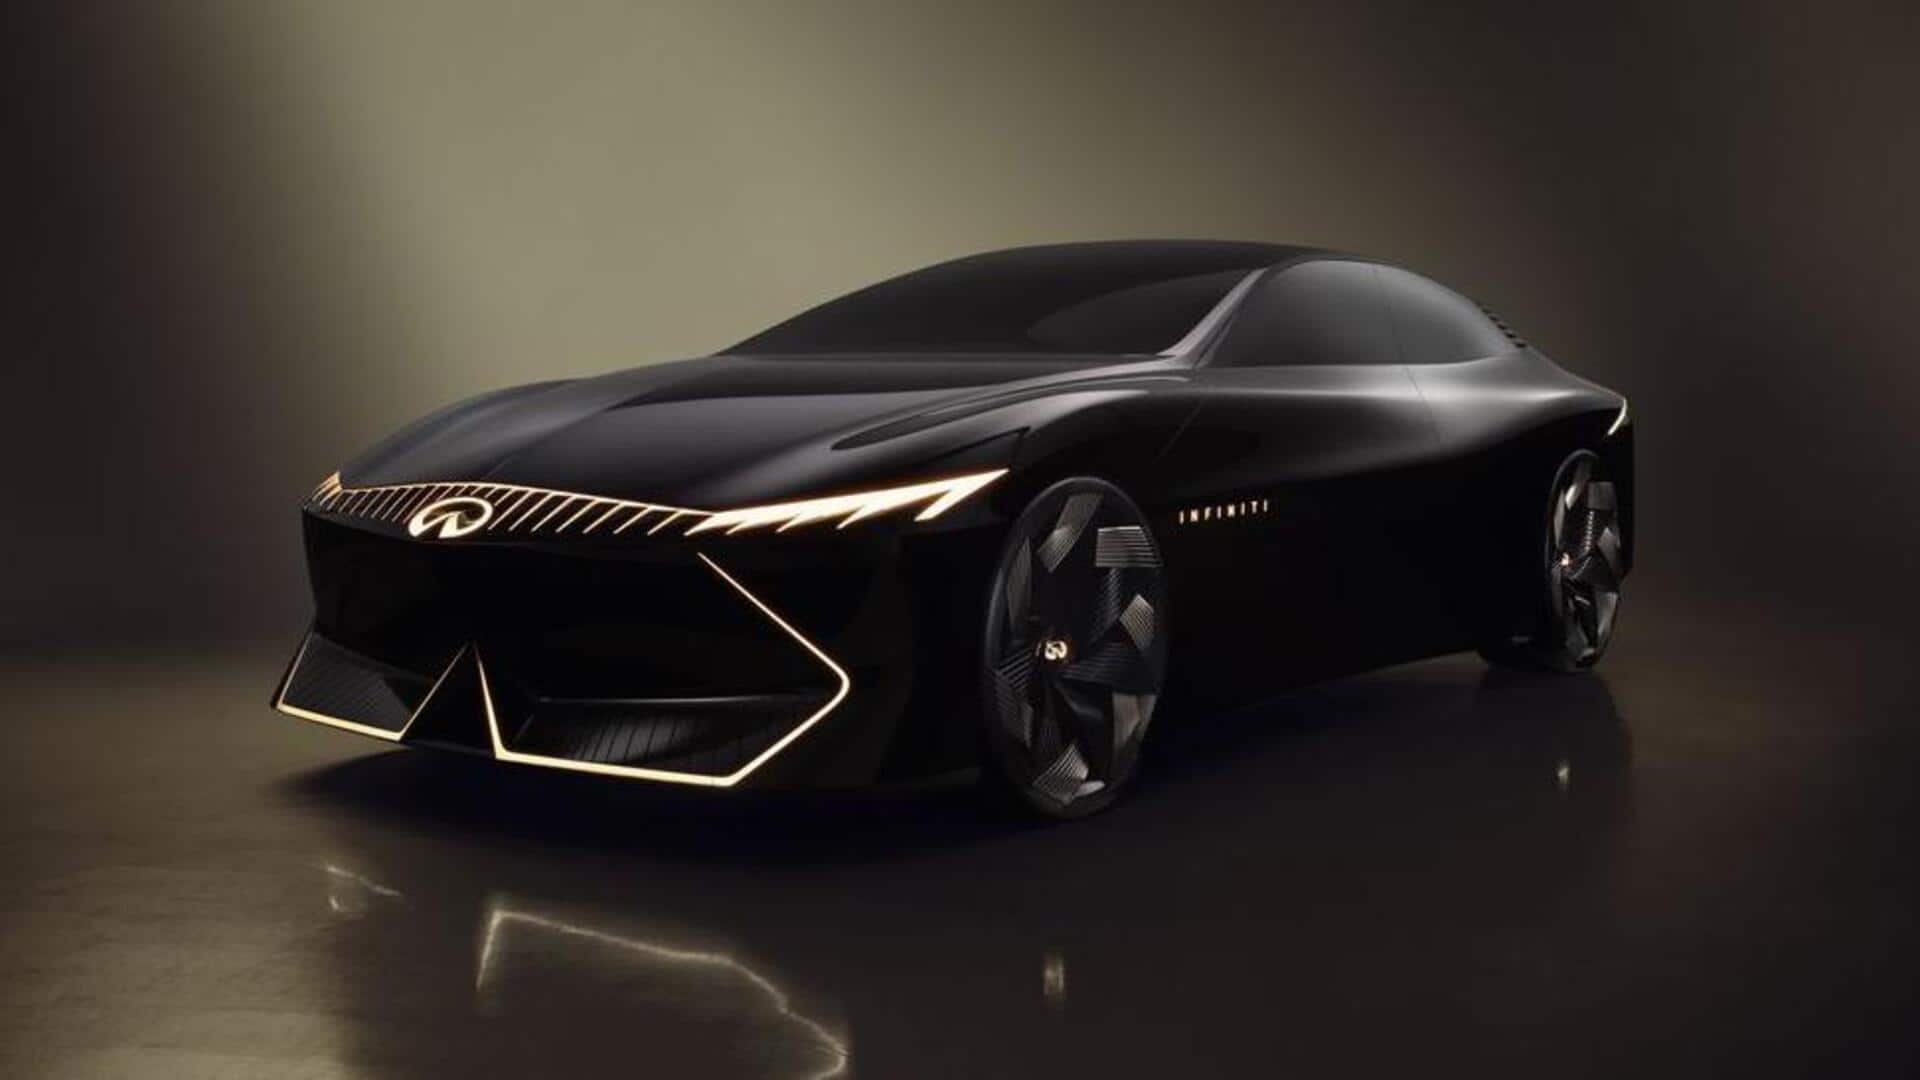 Infiniti developing its first EV based on Vision Qe concept